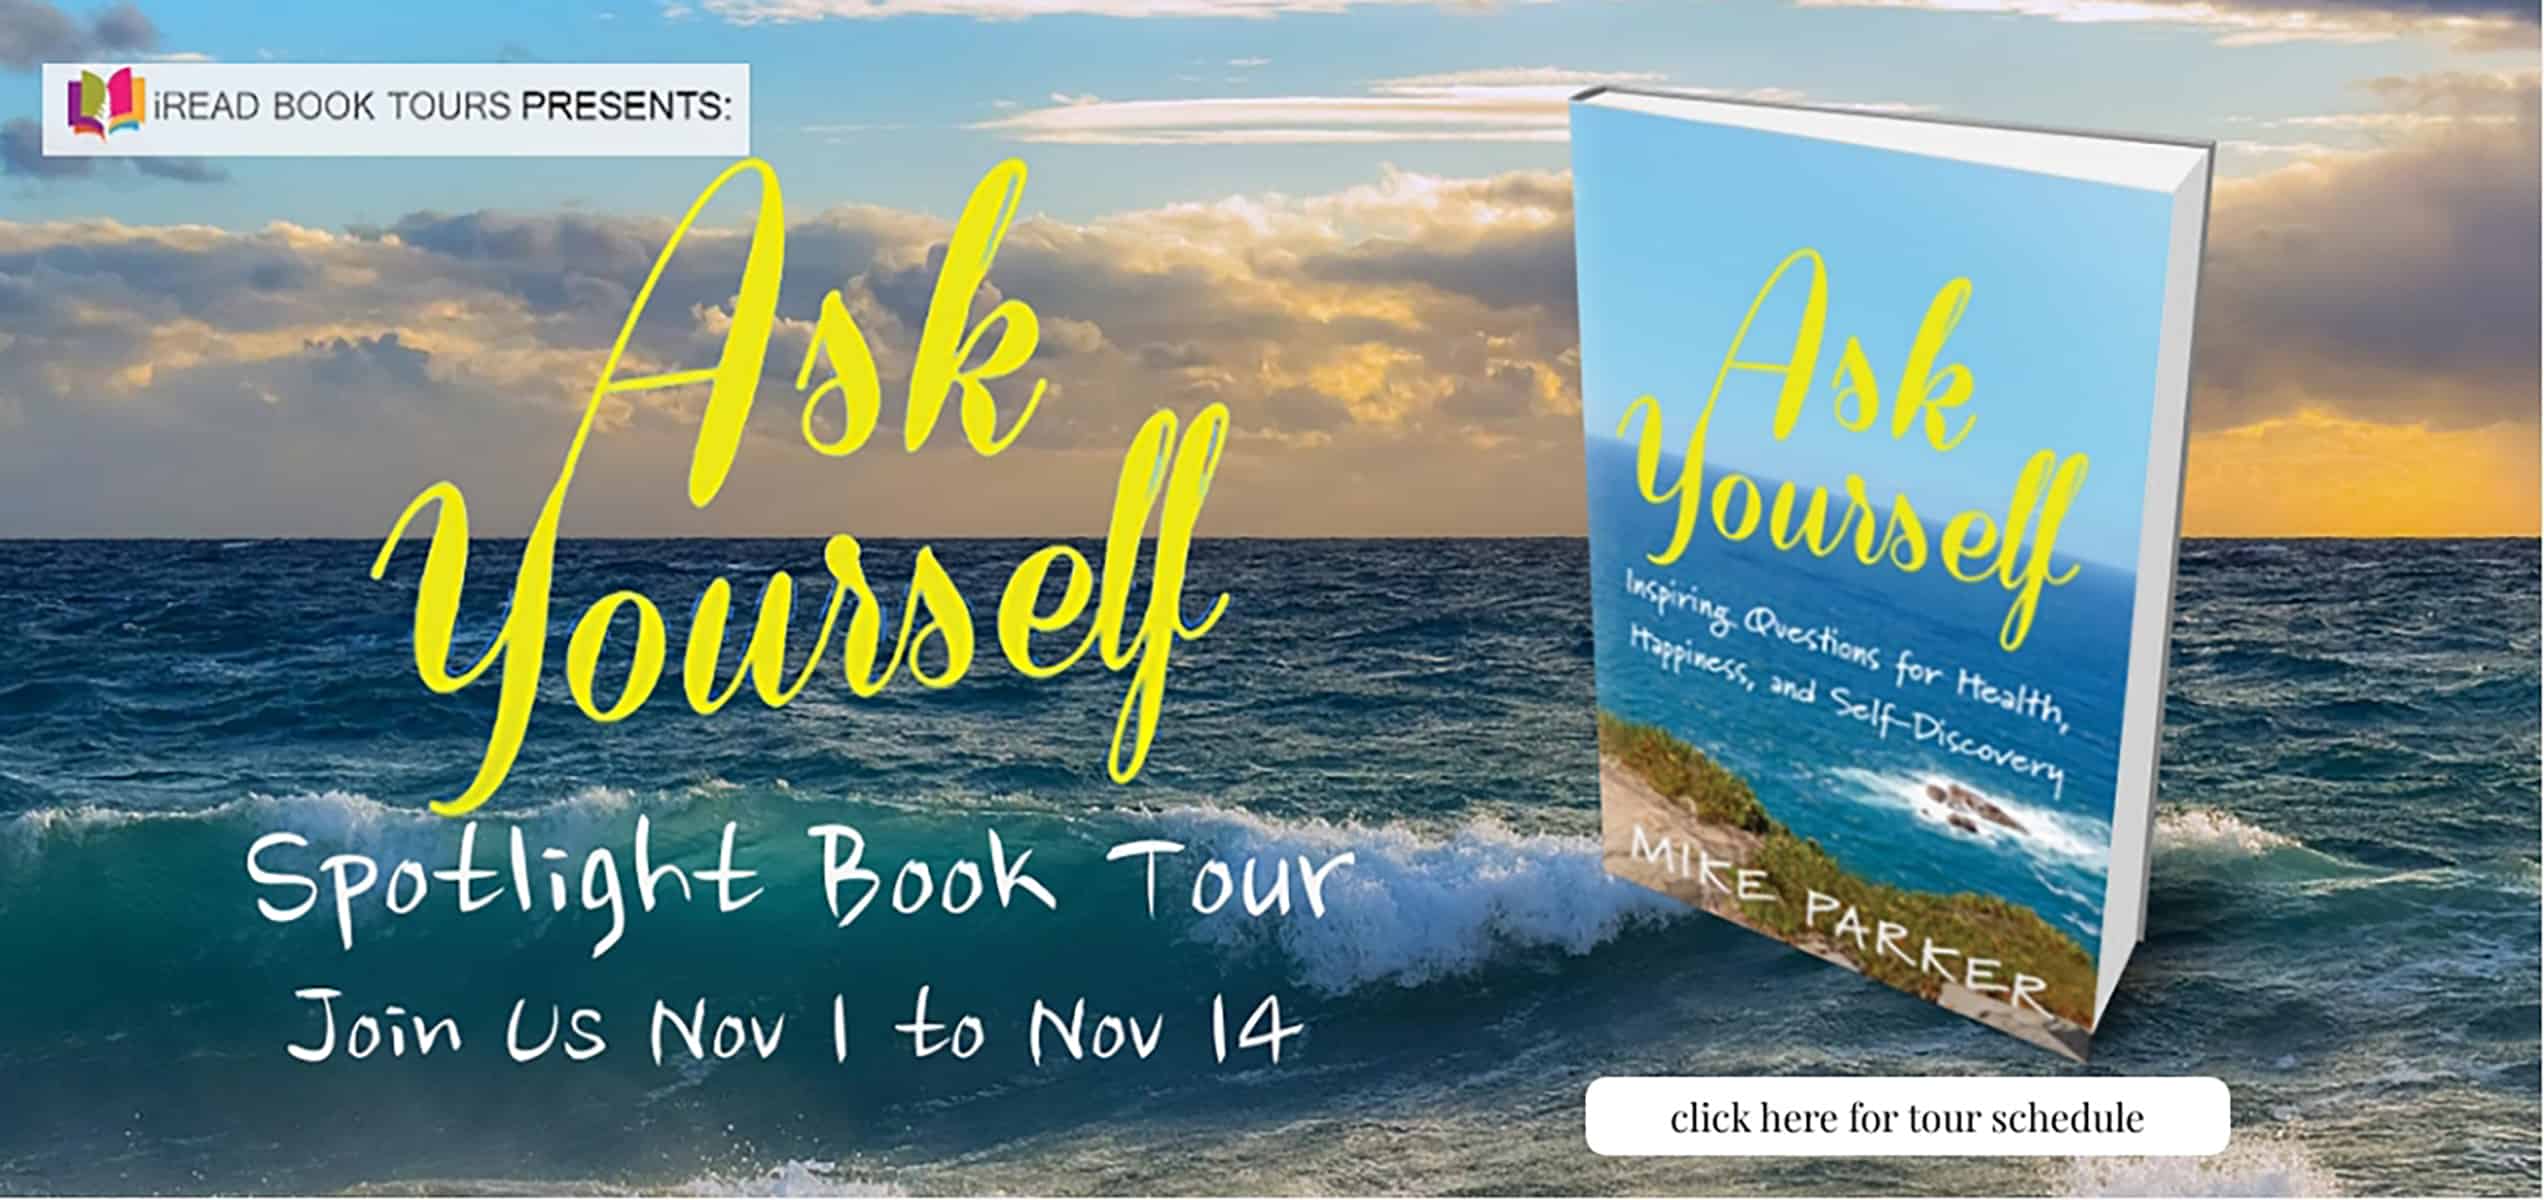 Ask Yourself: Inspiring Questions for Health, Happiness, and Self-Discovery by Mike Parker | Spotlight ~ November 1, 2022 Release